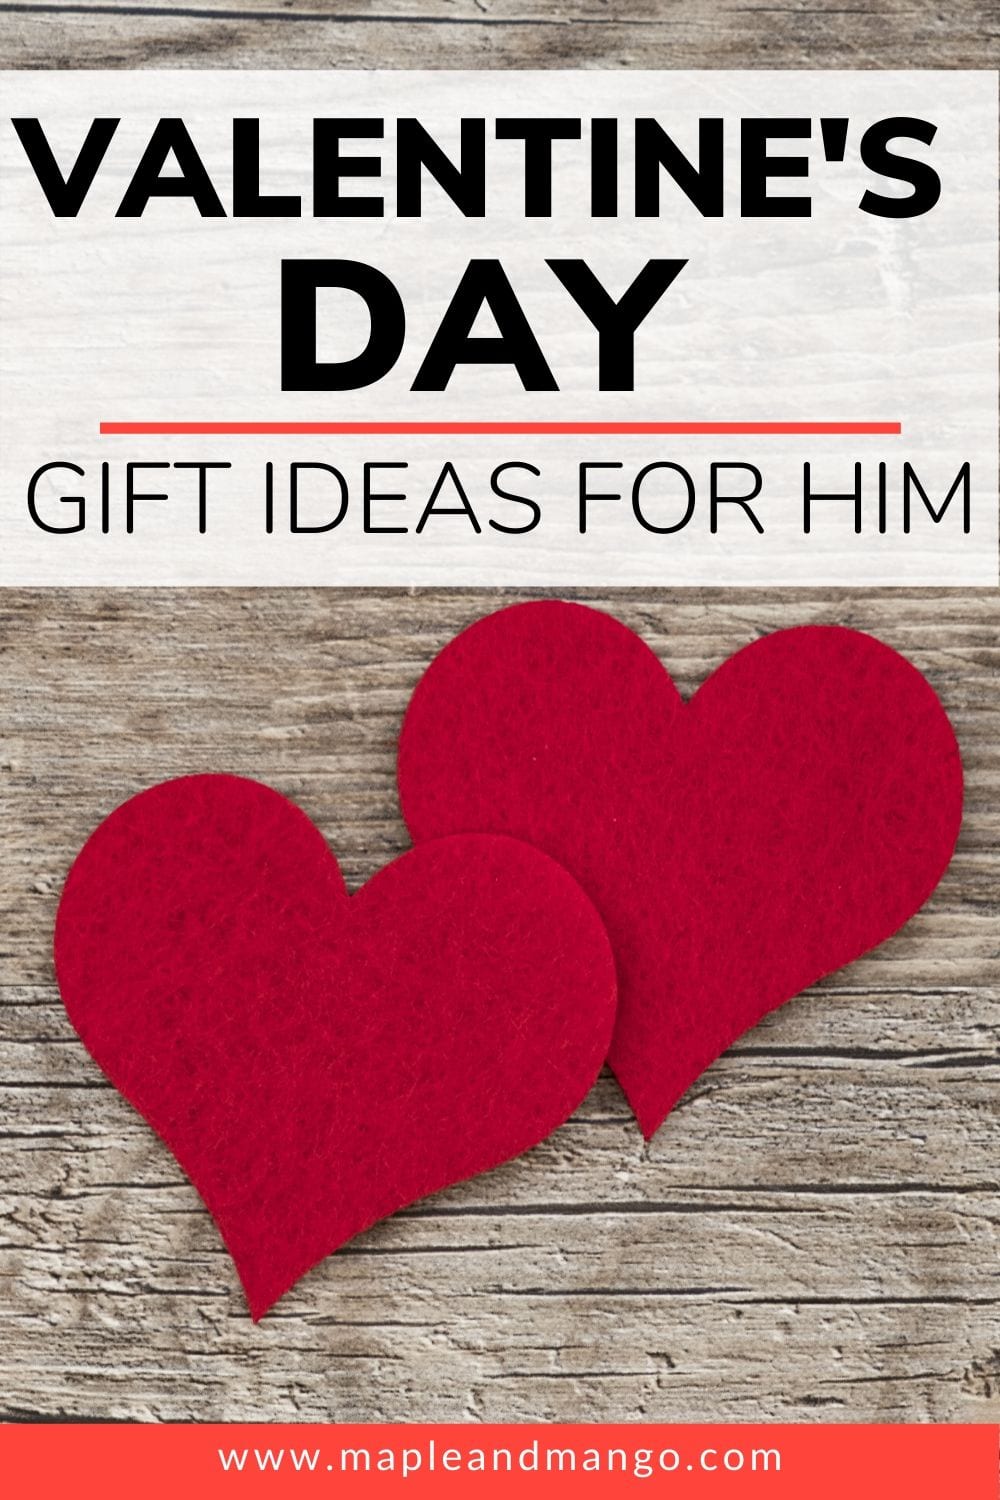 Two heart cut outs sitting on a wood background with the title "Valentine's Day Gift Ideas For Him"